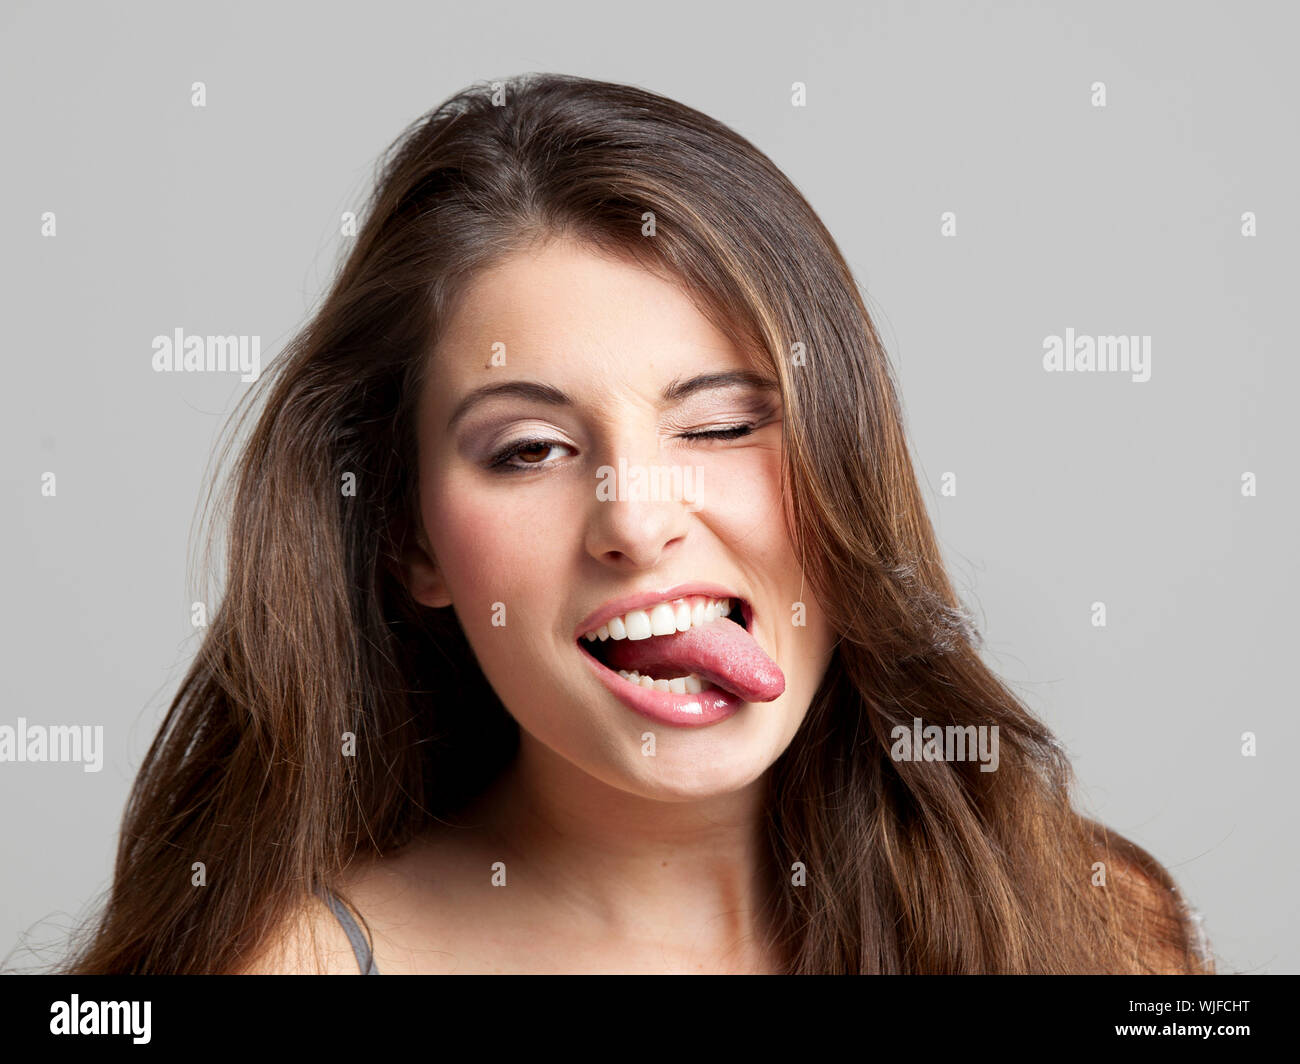 Studio portrait of a beautiful and expressive young woman Stock Photo